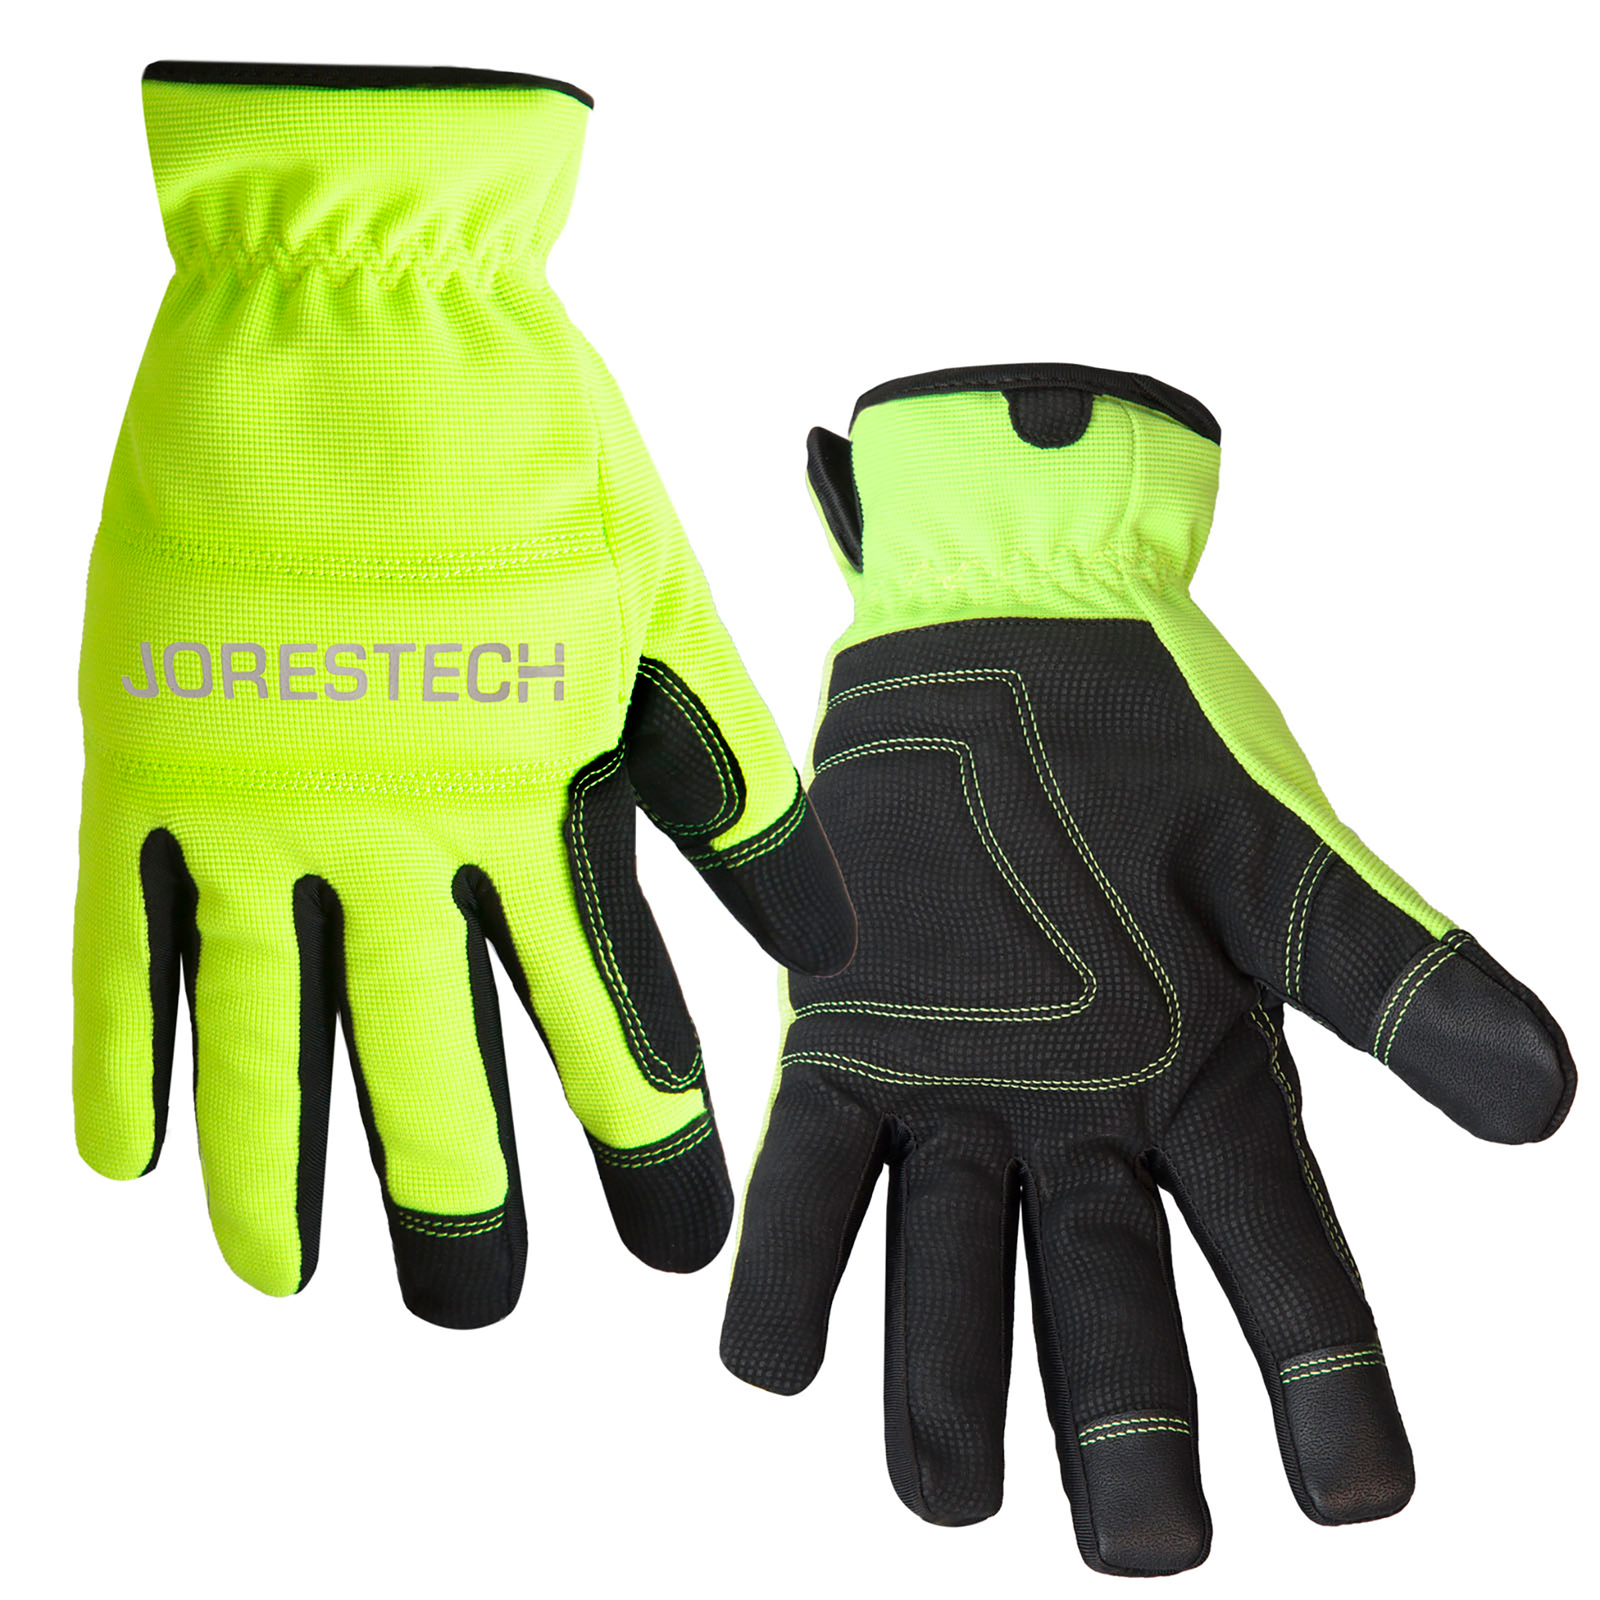 One pair of hi-vis touchscreen JORESTECH safety work gloves with fleece lining for weather protection